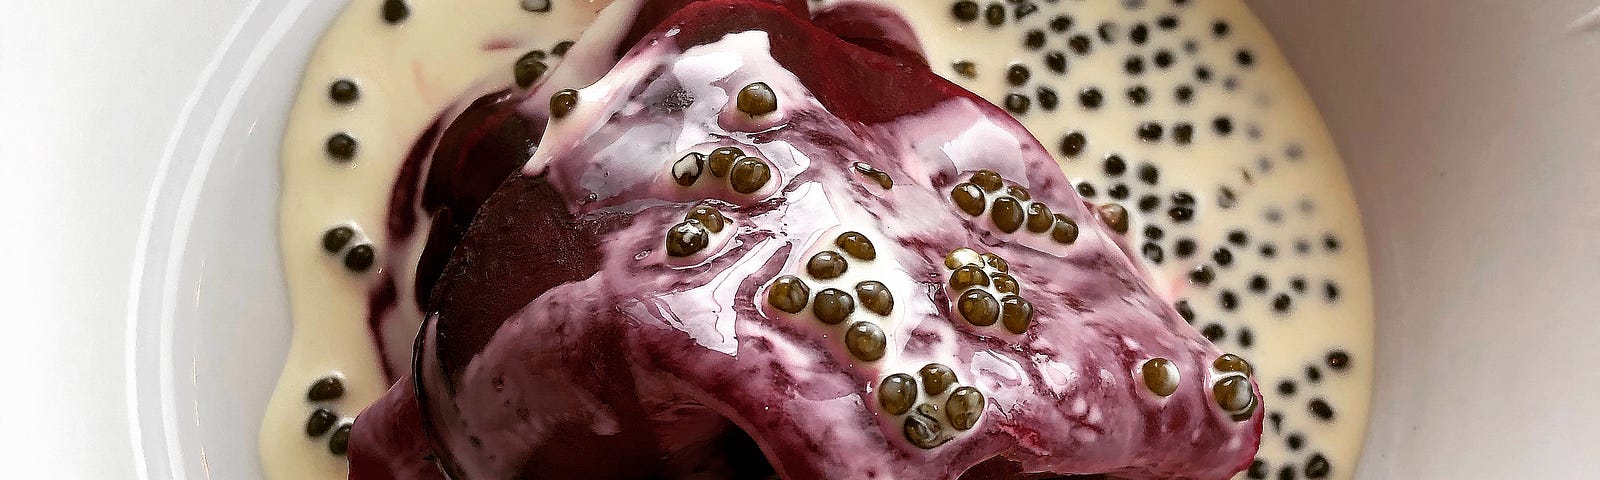 Salt-crusted red beetroot from the garden with caviar cream